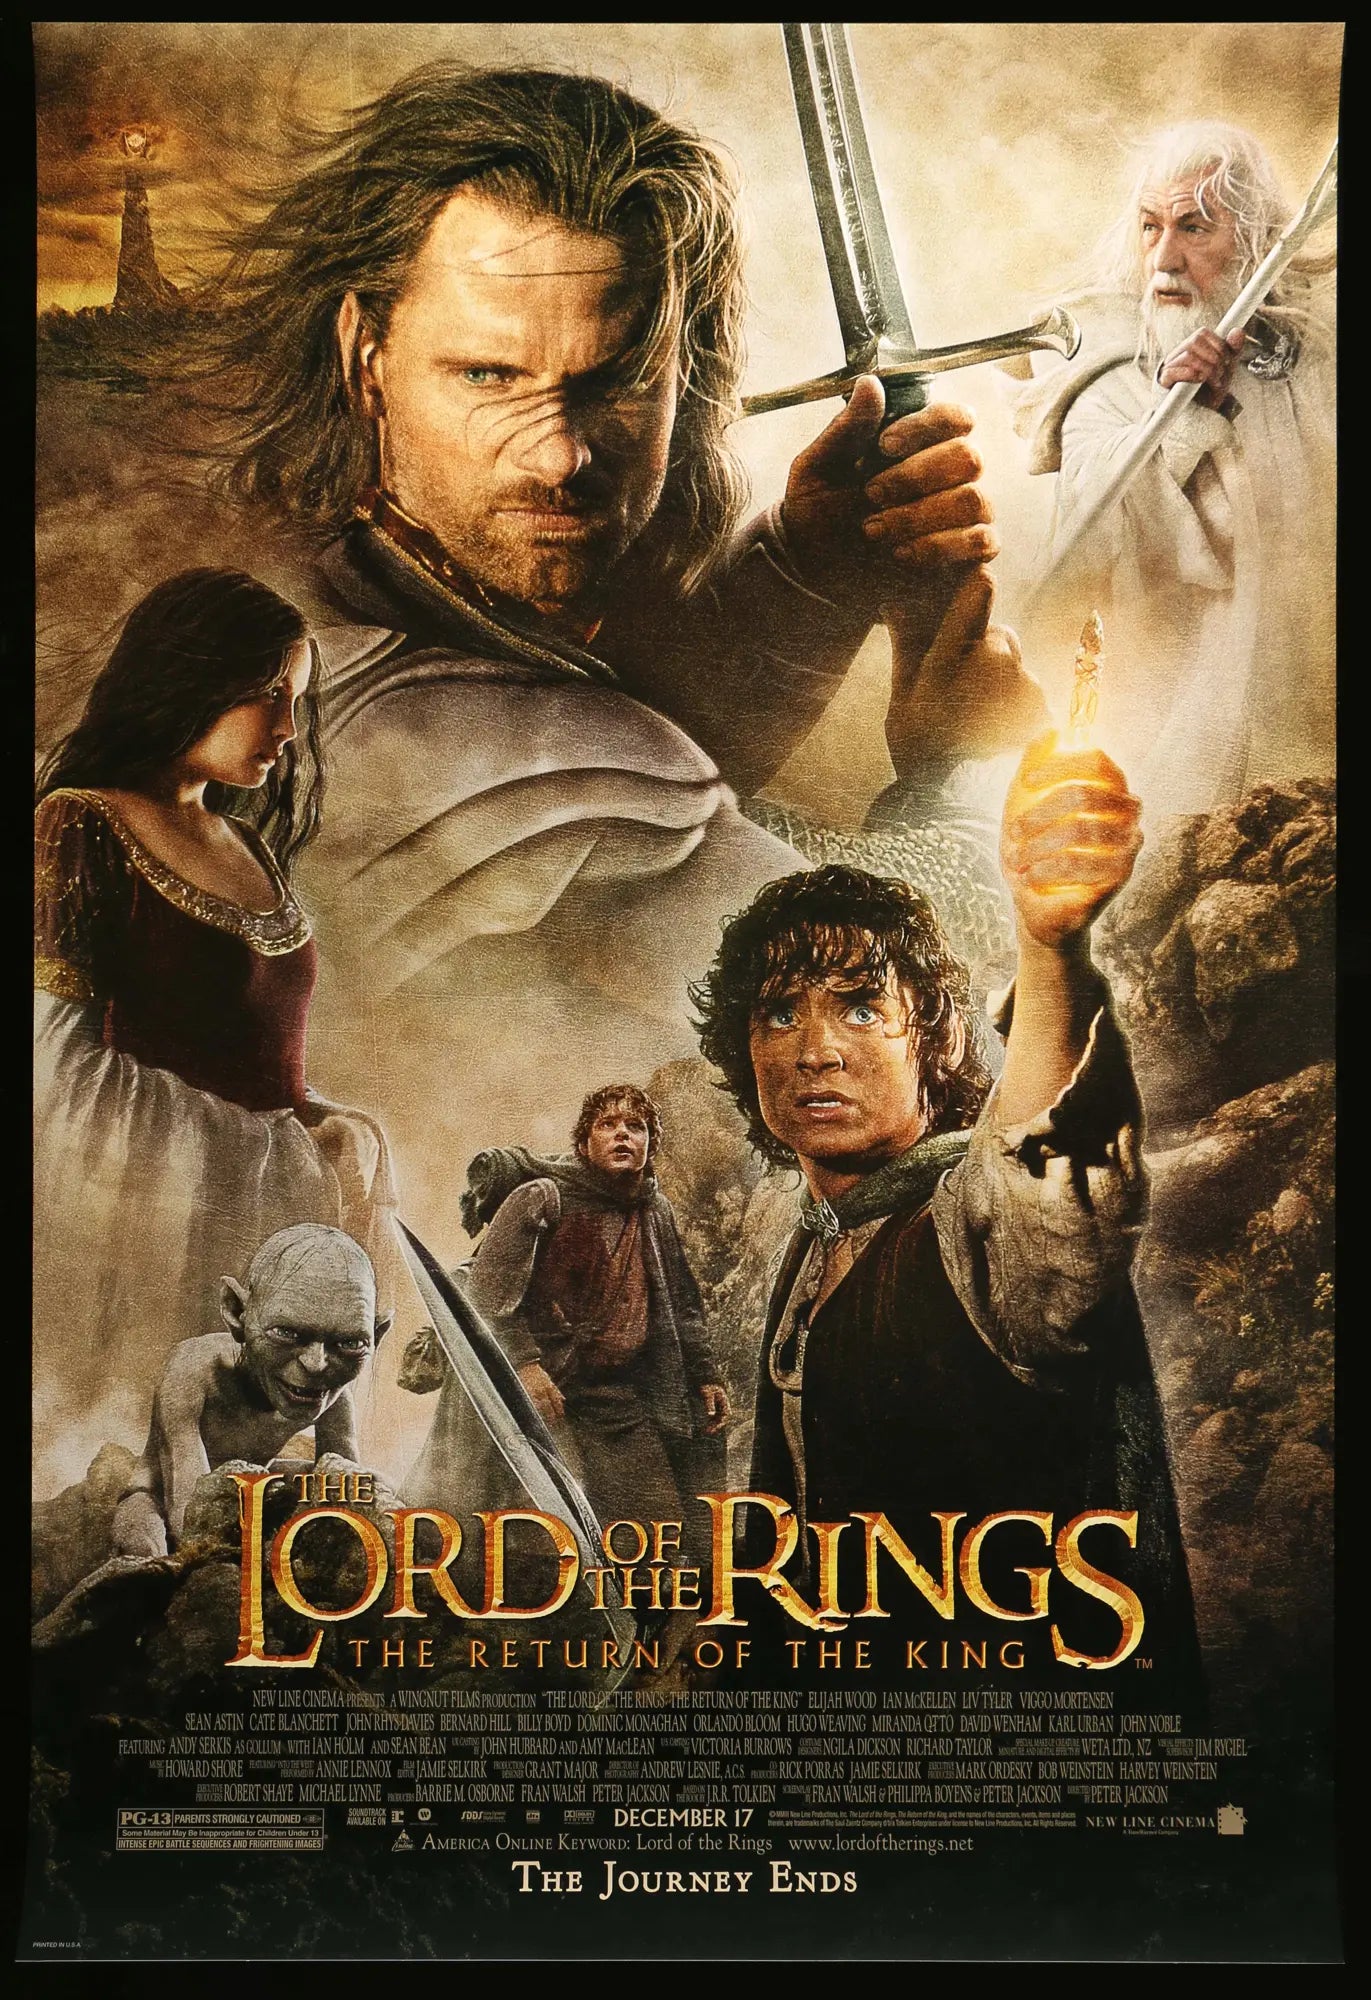 Krrish, Brahmastra, Baahubali: Indian films inspired by 'Lord Of The Rings'  | Times of India